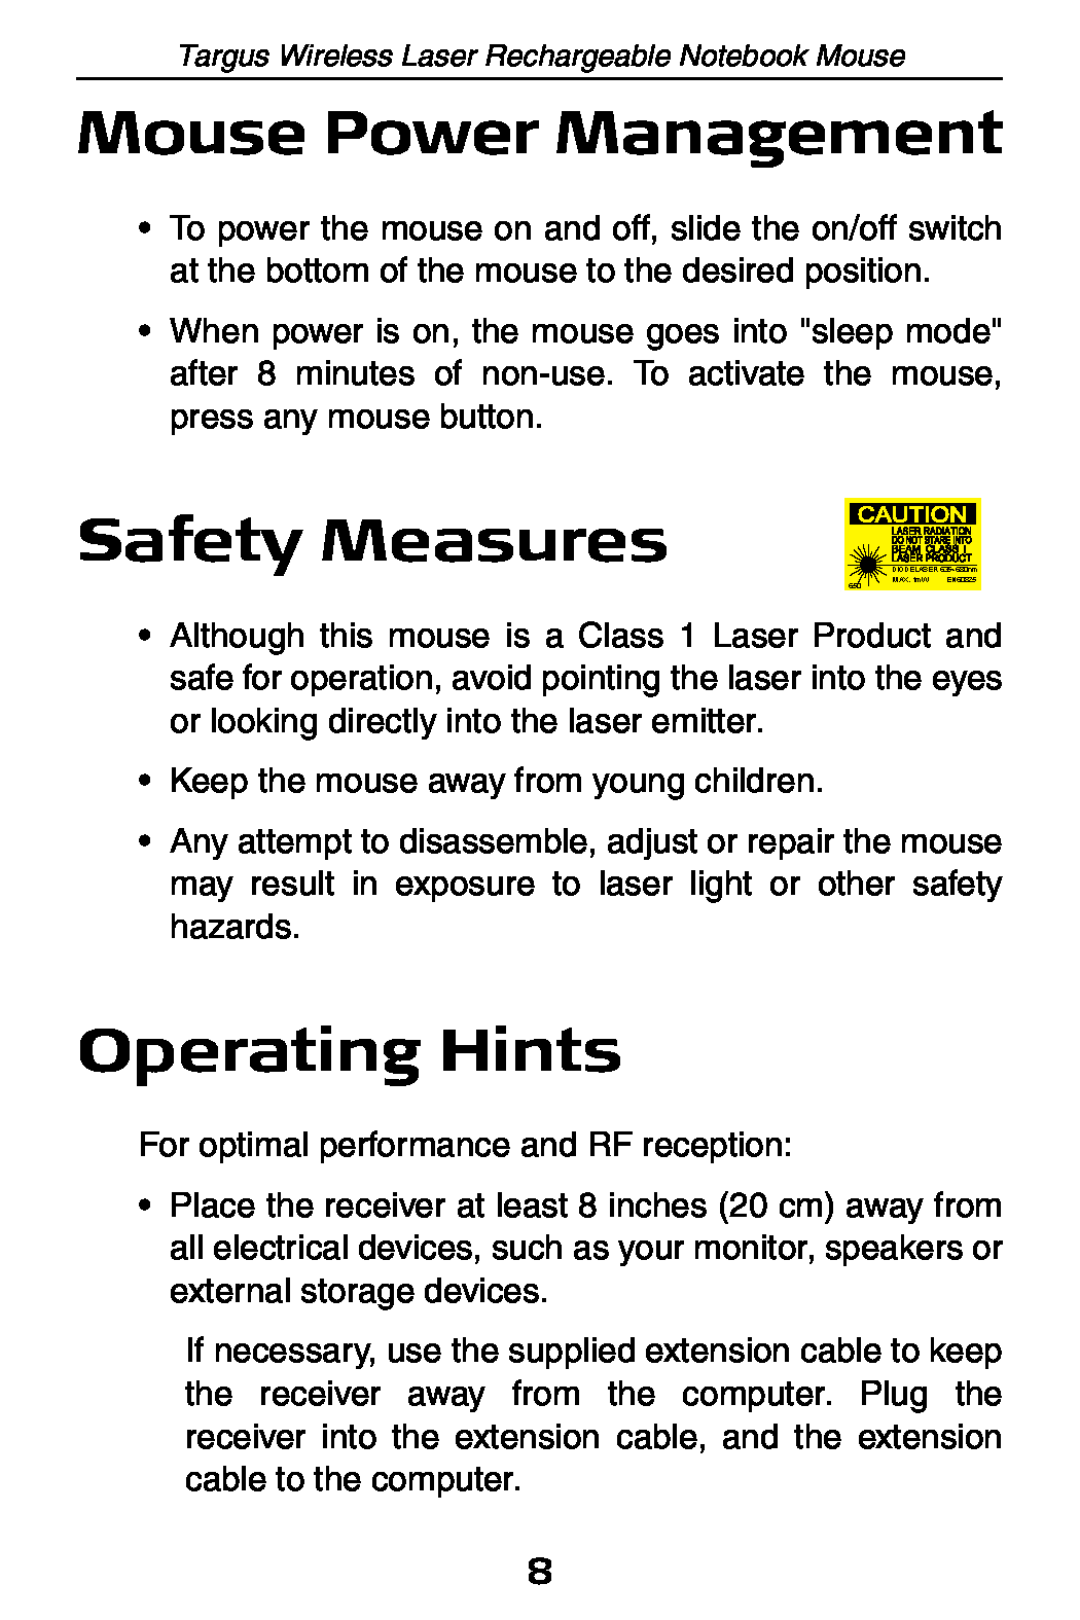 Targus 410-0008-001A manual Mouse Power Management, Safety Measures, Operating Hints 